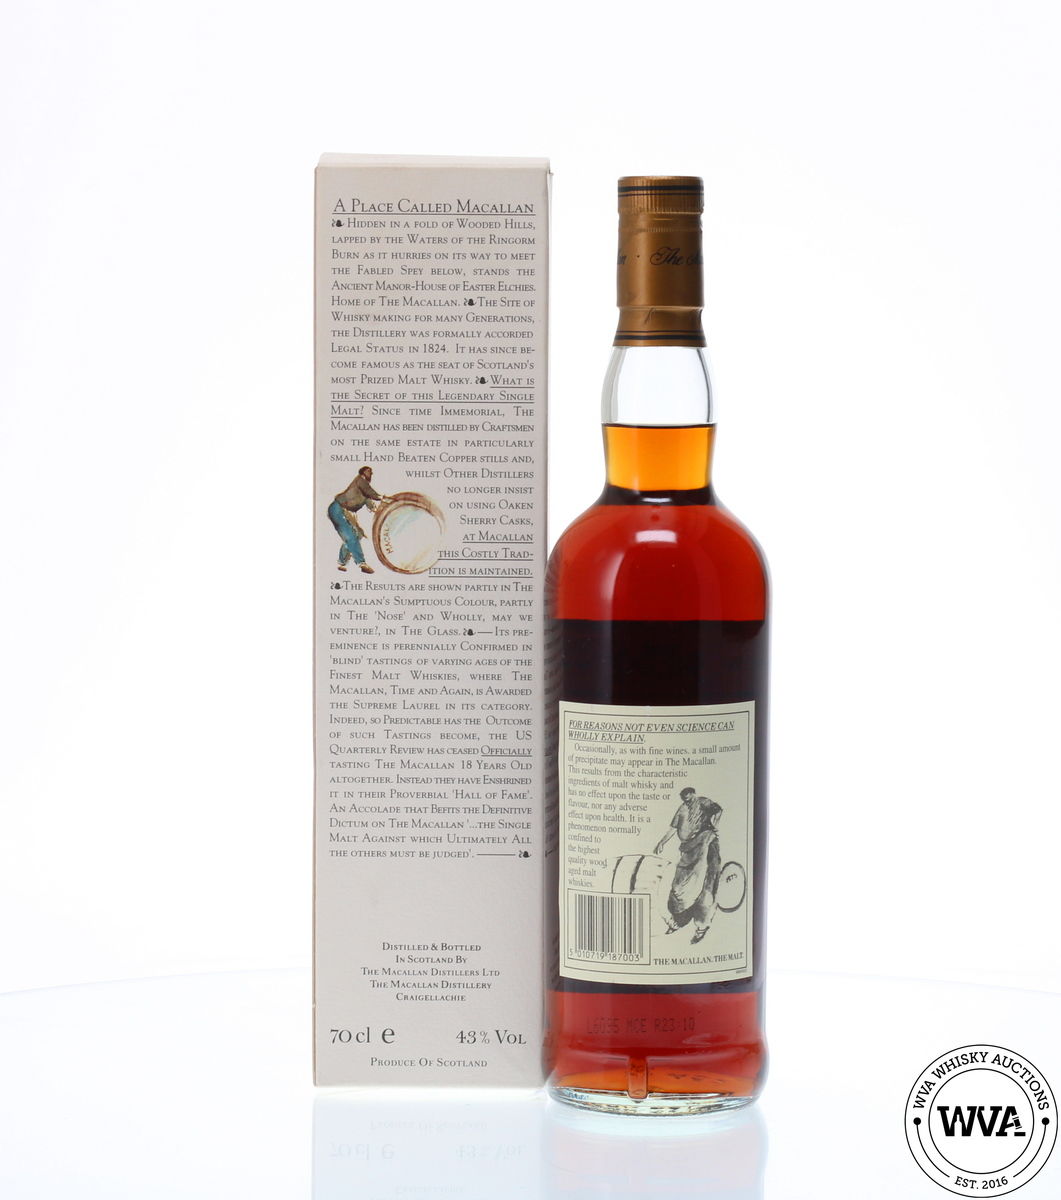 MACALLAN 18 YEAR OLD 1978 RELEASE